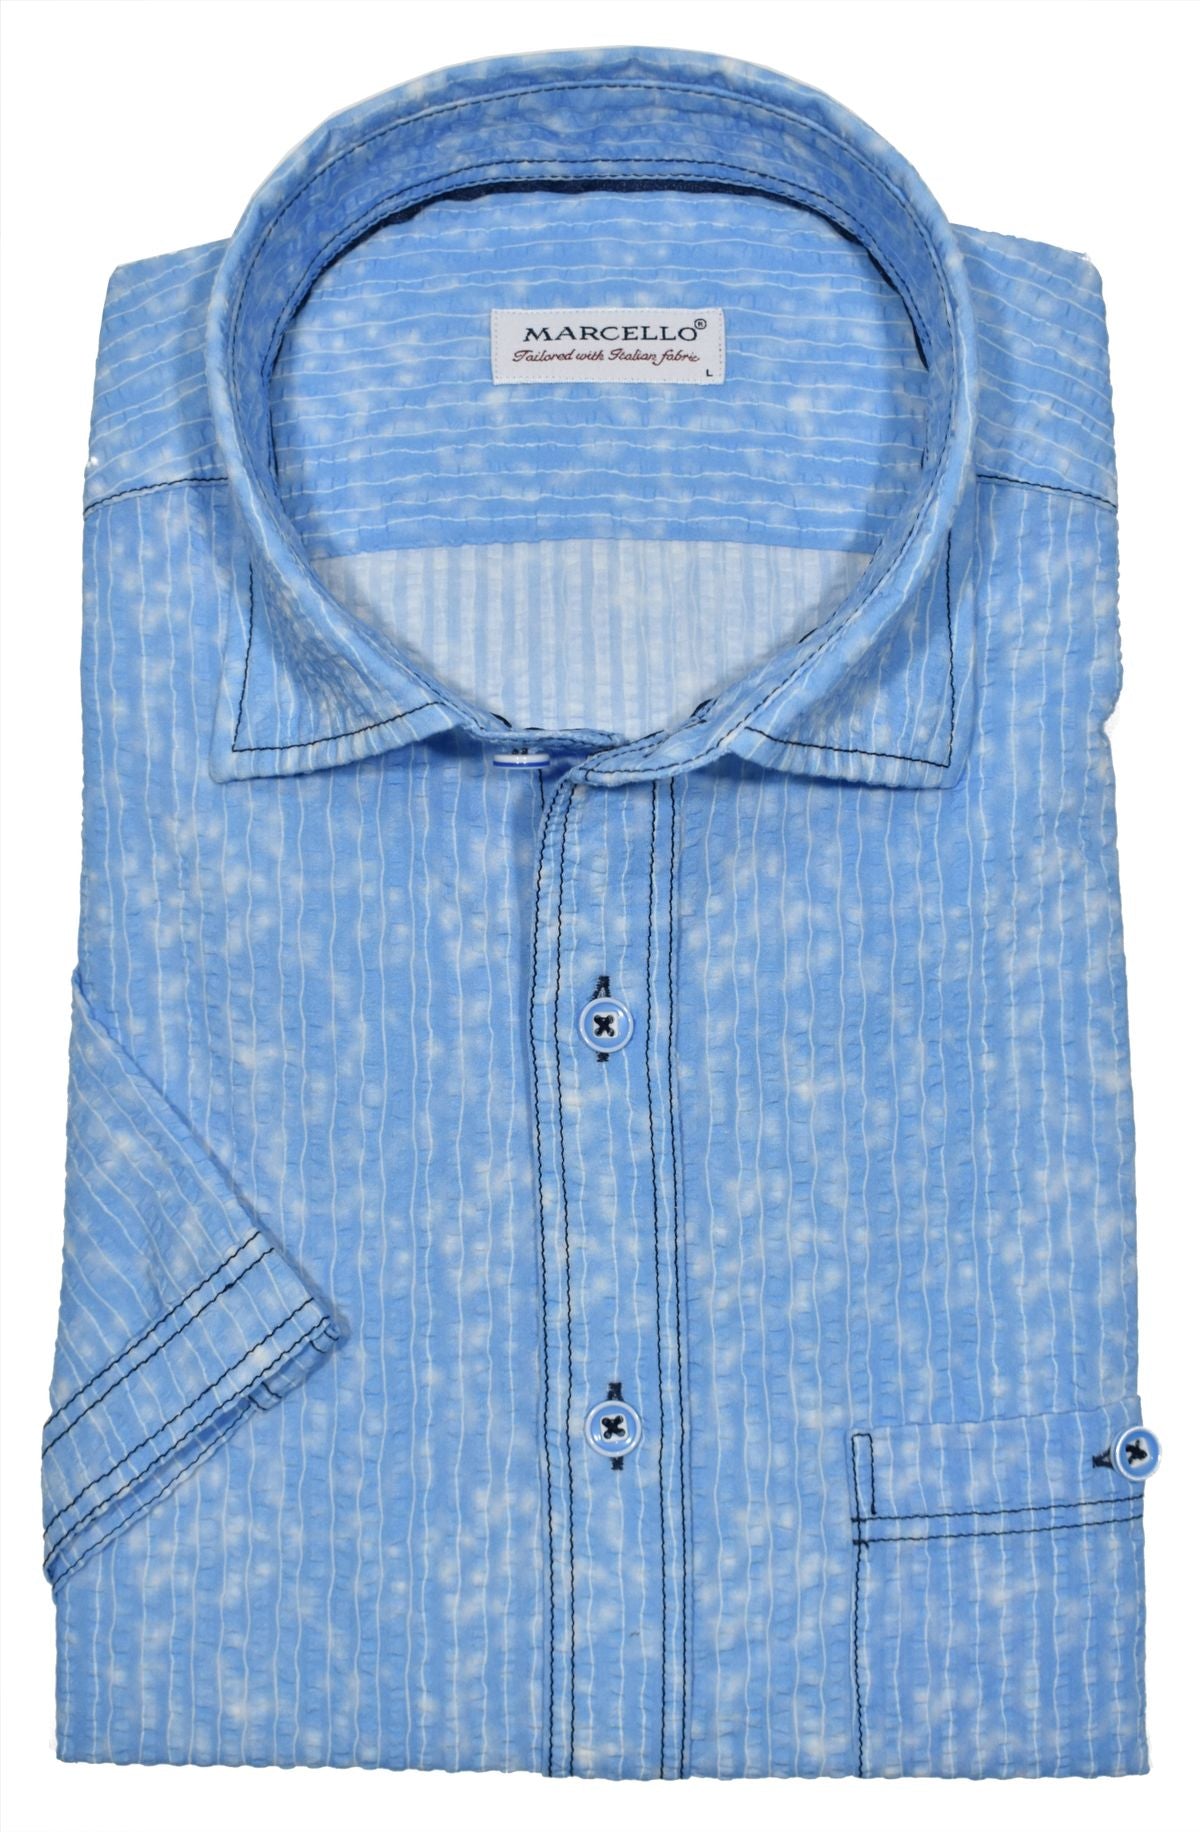 Stay cool and stylish in the W821S Sky Seersucker shirt. Made from lightweight, seersucker fabric, this short-sleeved model comes in a soft blue hue with shades of white. Contrast navy stitching and a classic chest pocket provide the perfect trendy touch, while custom-matched buttons keep you looking sharp.